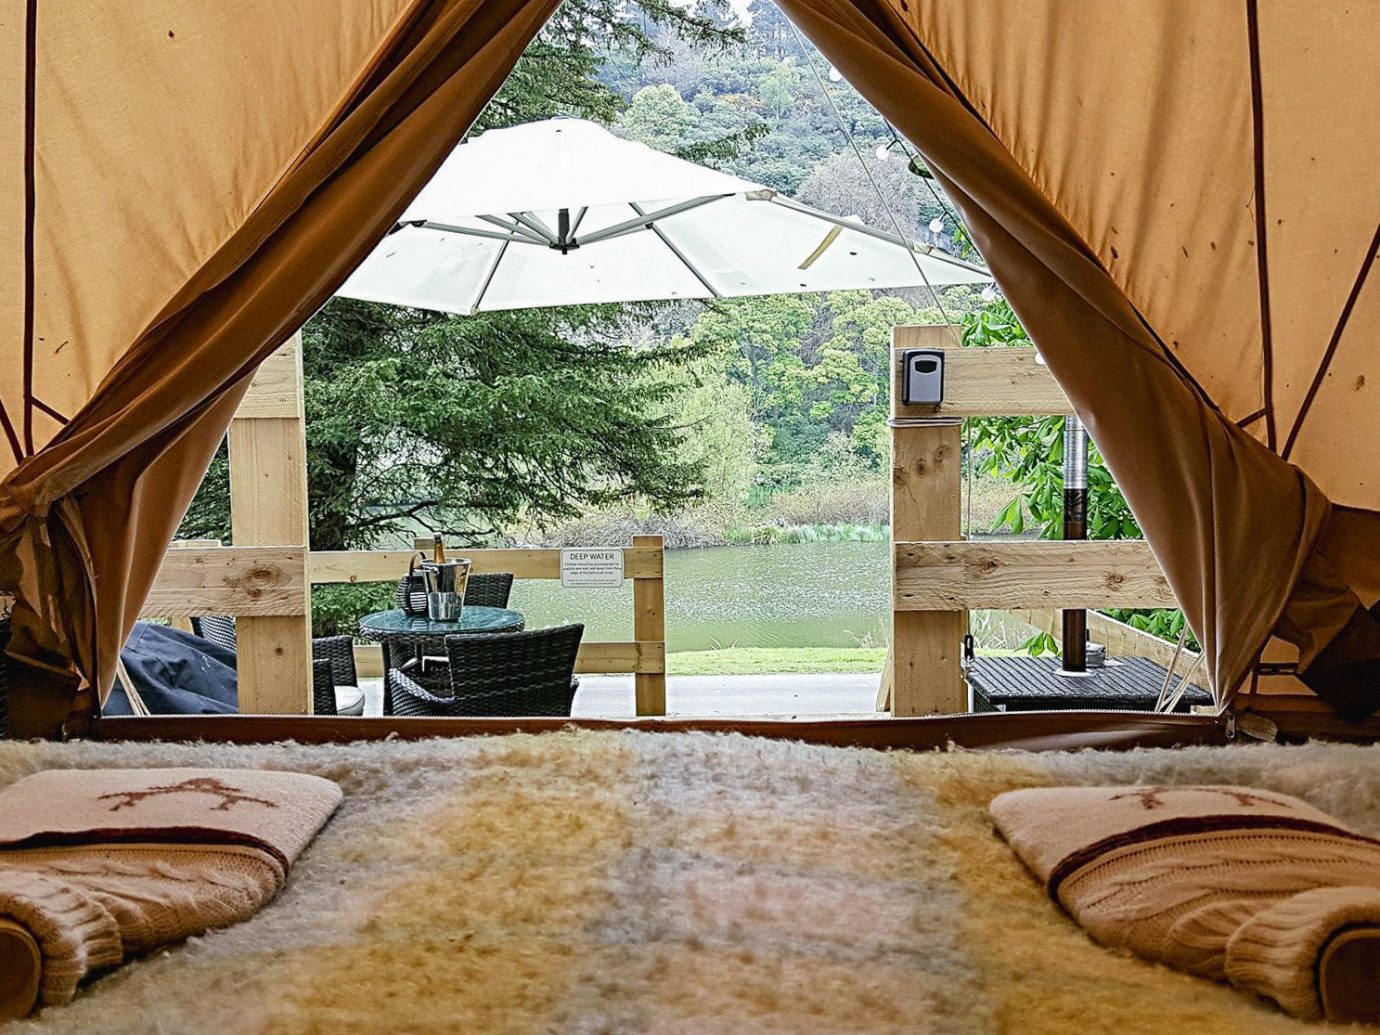 Glamping Outdoors + Adventure Trip Ideas property tent room wood home interior design window estate real estate house daylighting